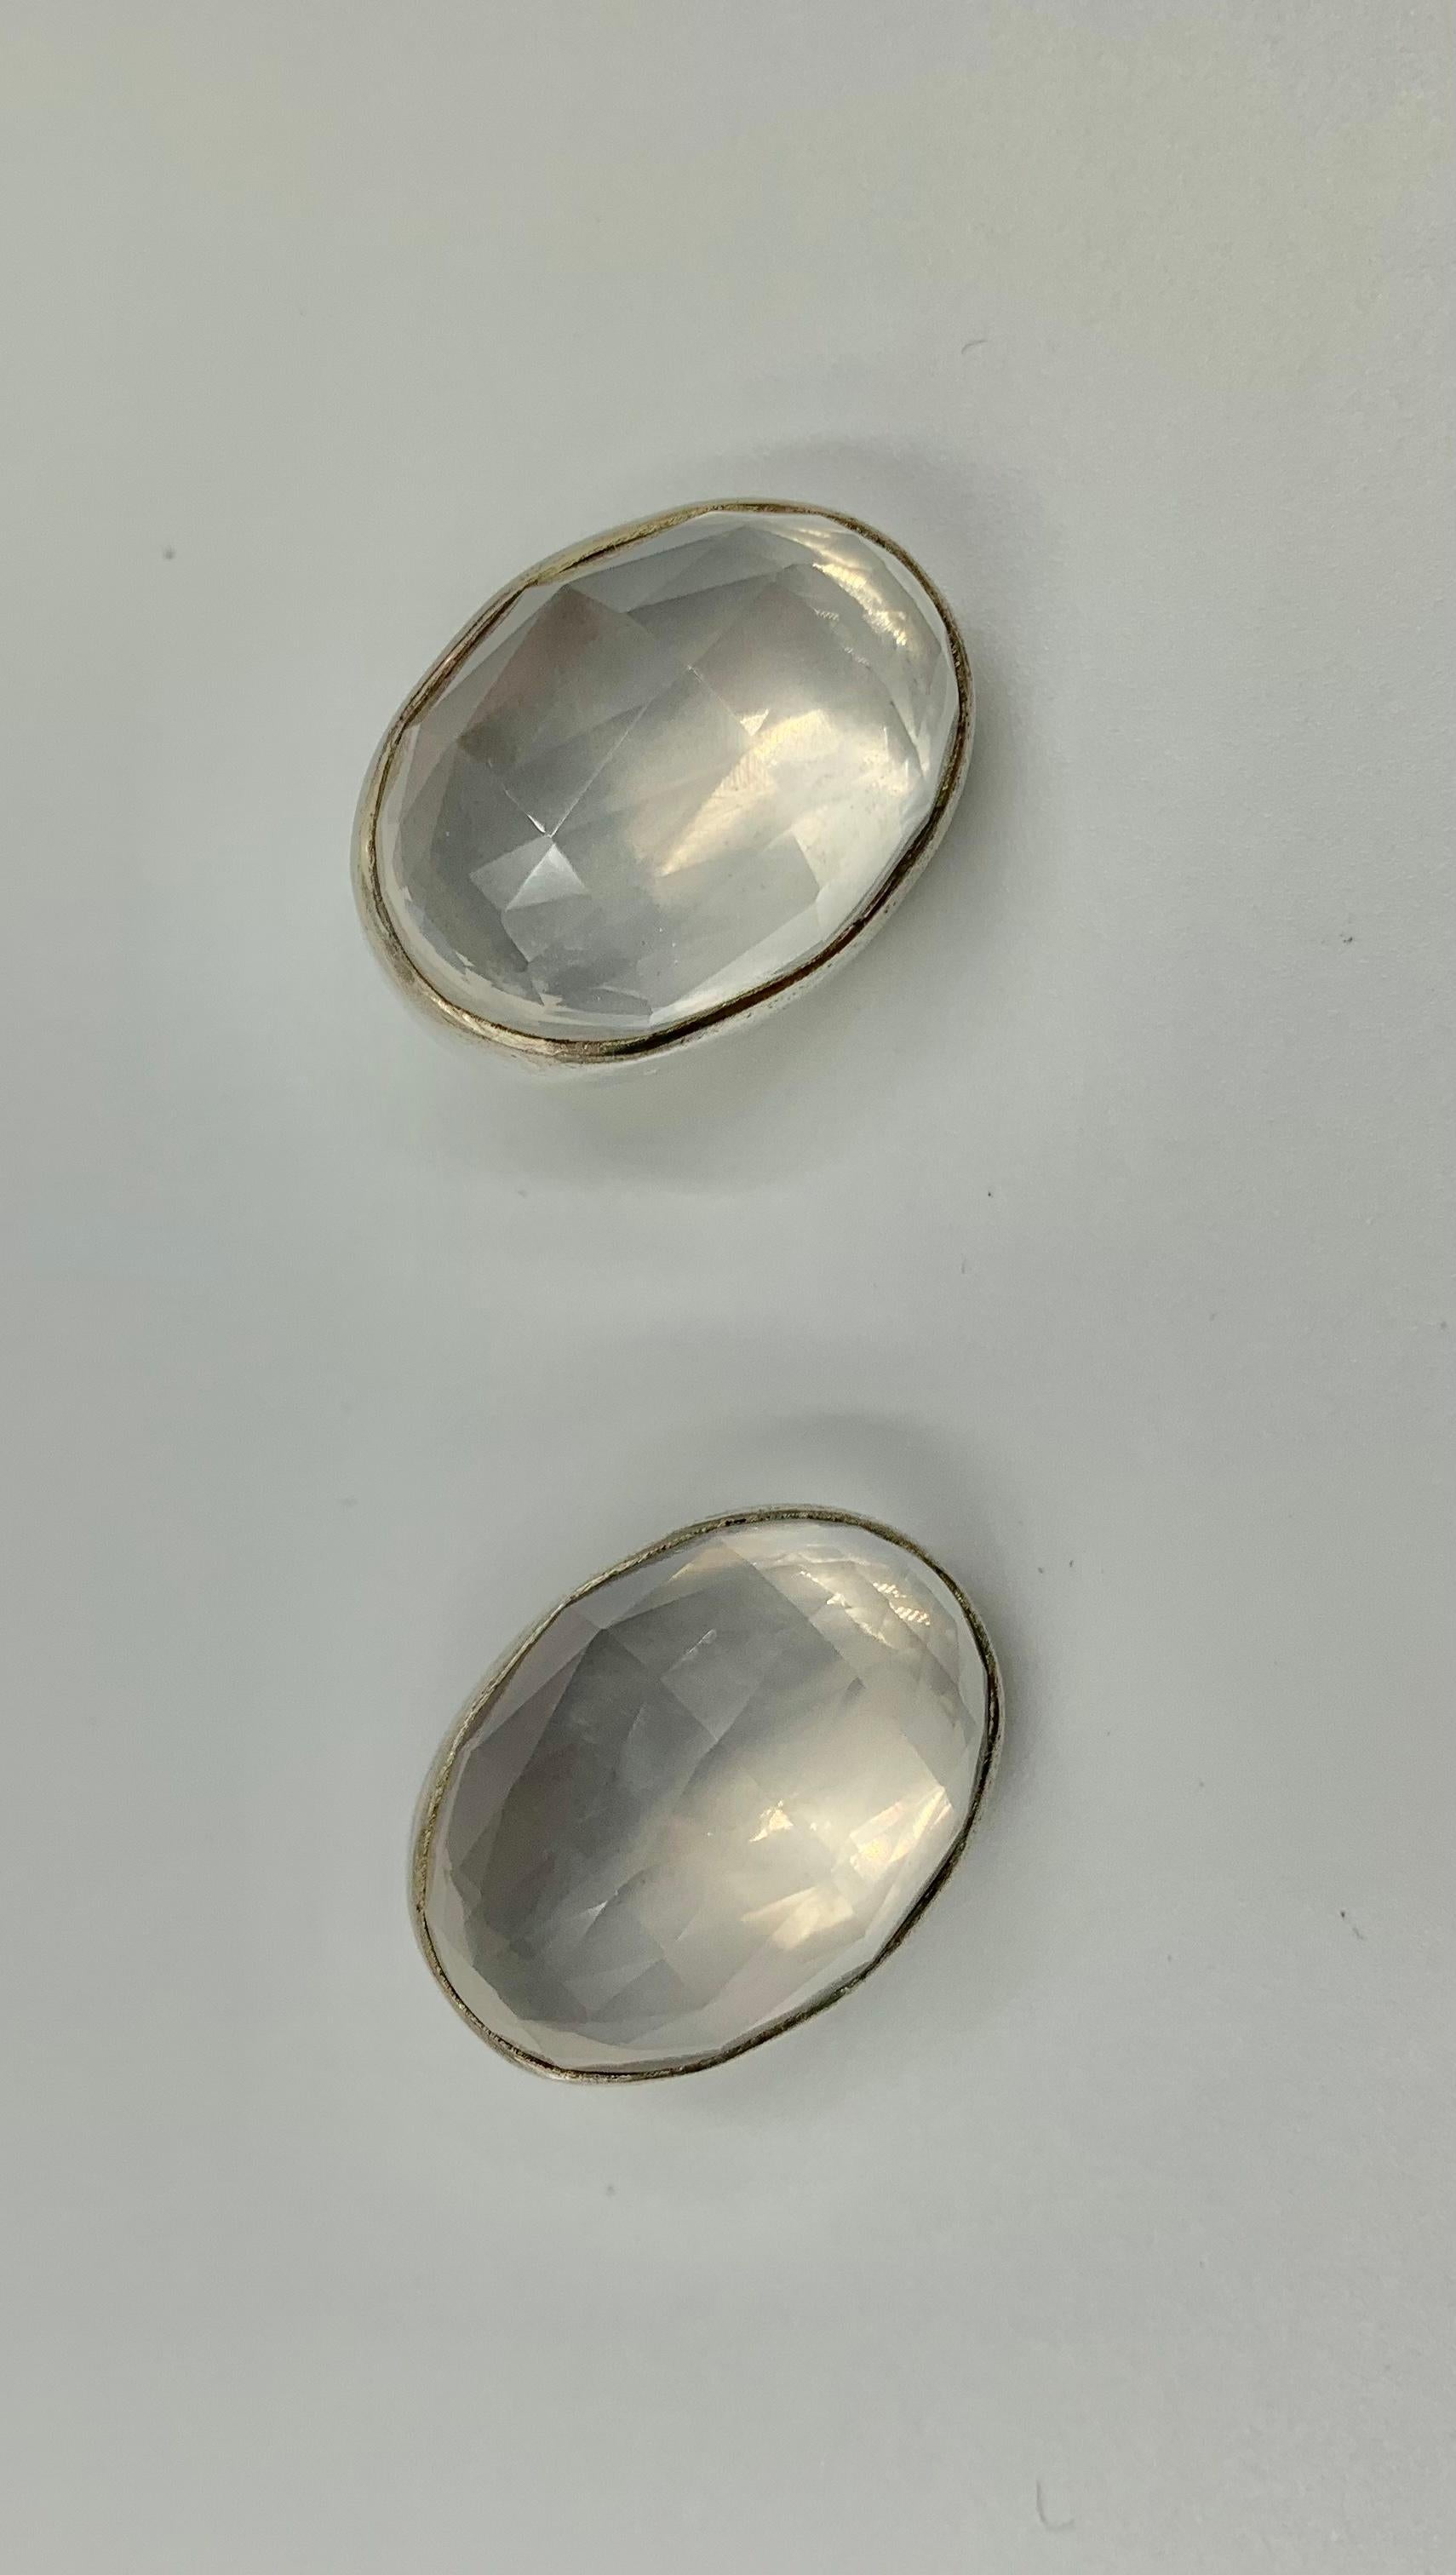 Vintage Stephen Dweck One-of-a-Kind OAK White Calcedony Sterling Silver Earrings For Sale 4